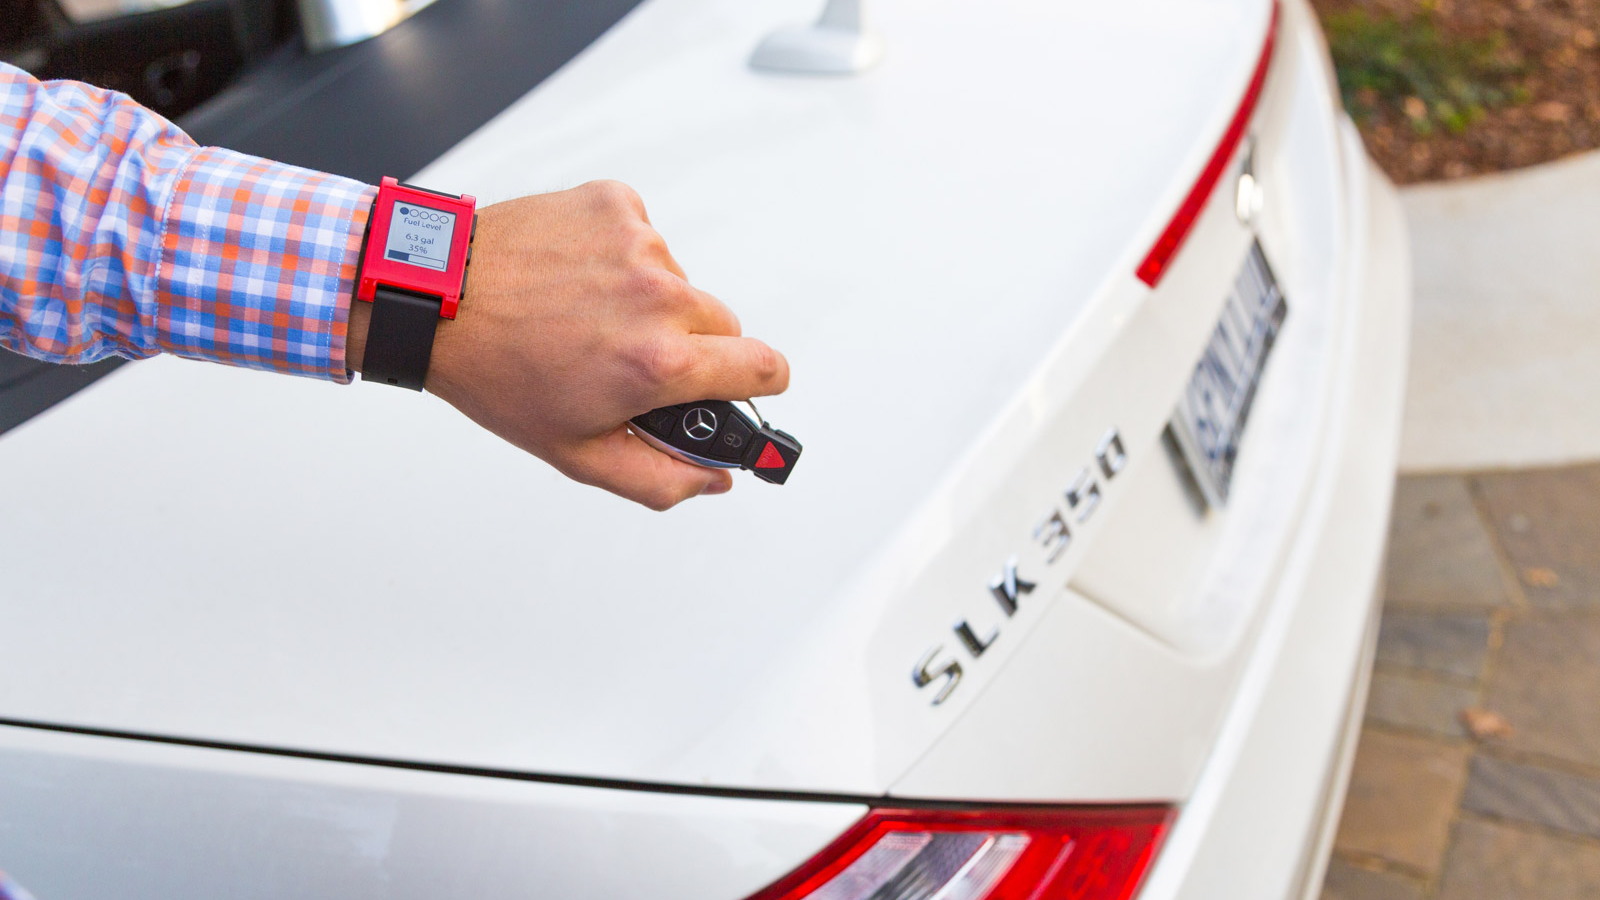 Mercedes-Benz and Pebble Technology smart watch